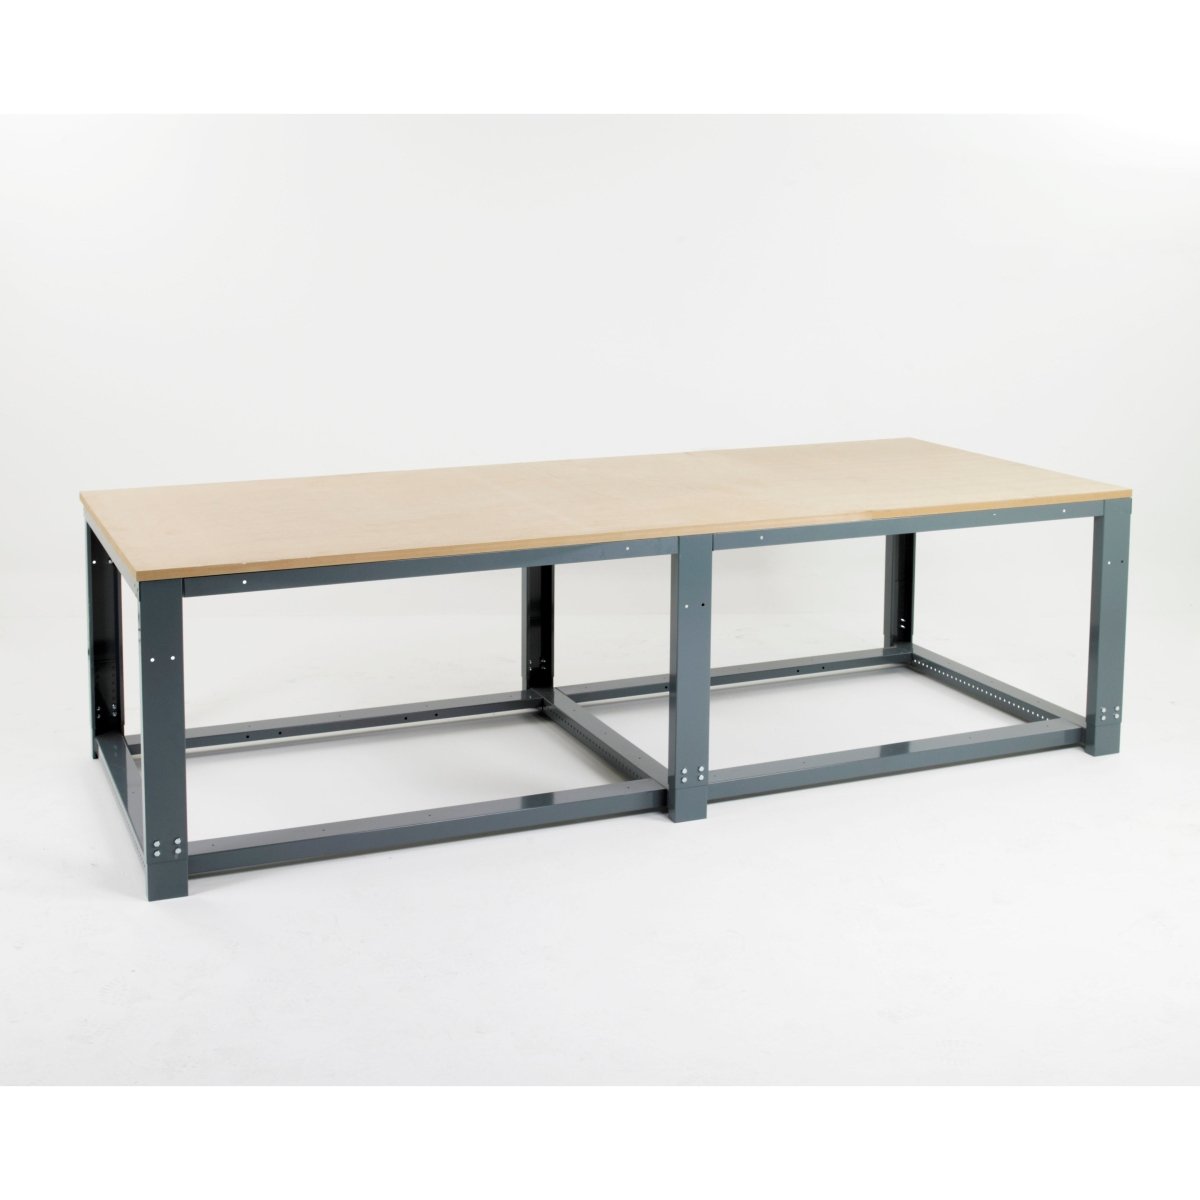 Complete Modular Work Bench With MDF Worktop 1000Kg Capacity - Warehouse Storage Products